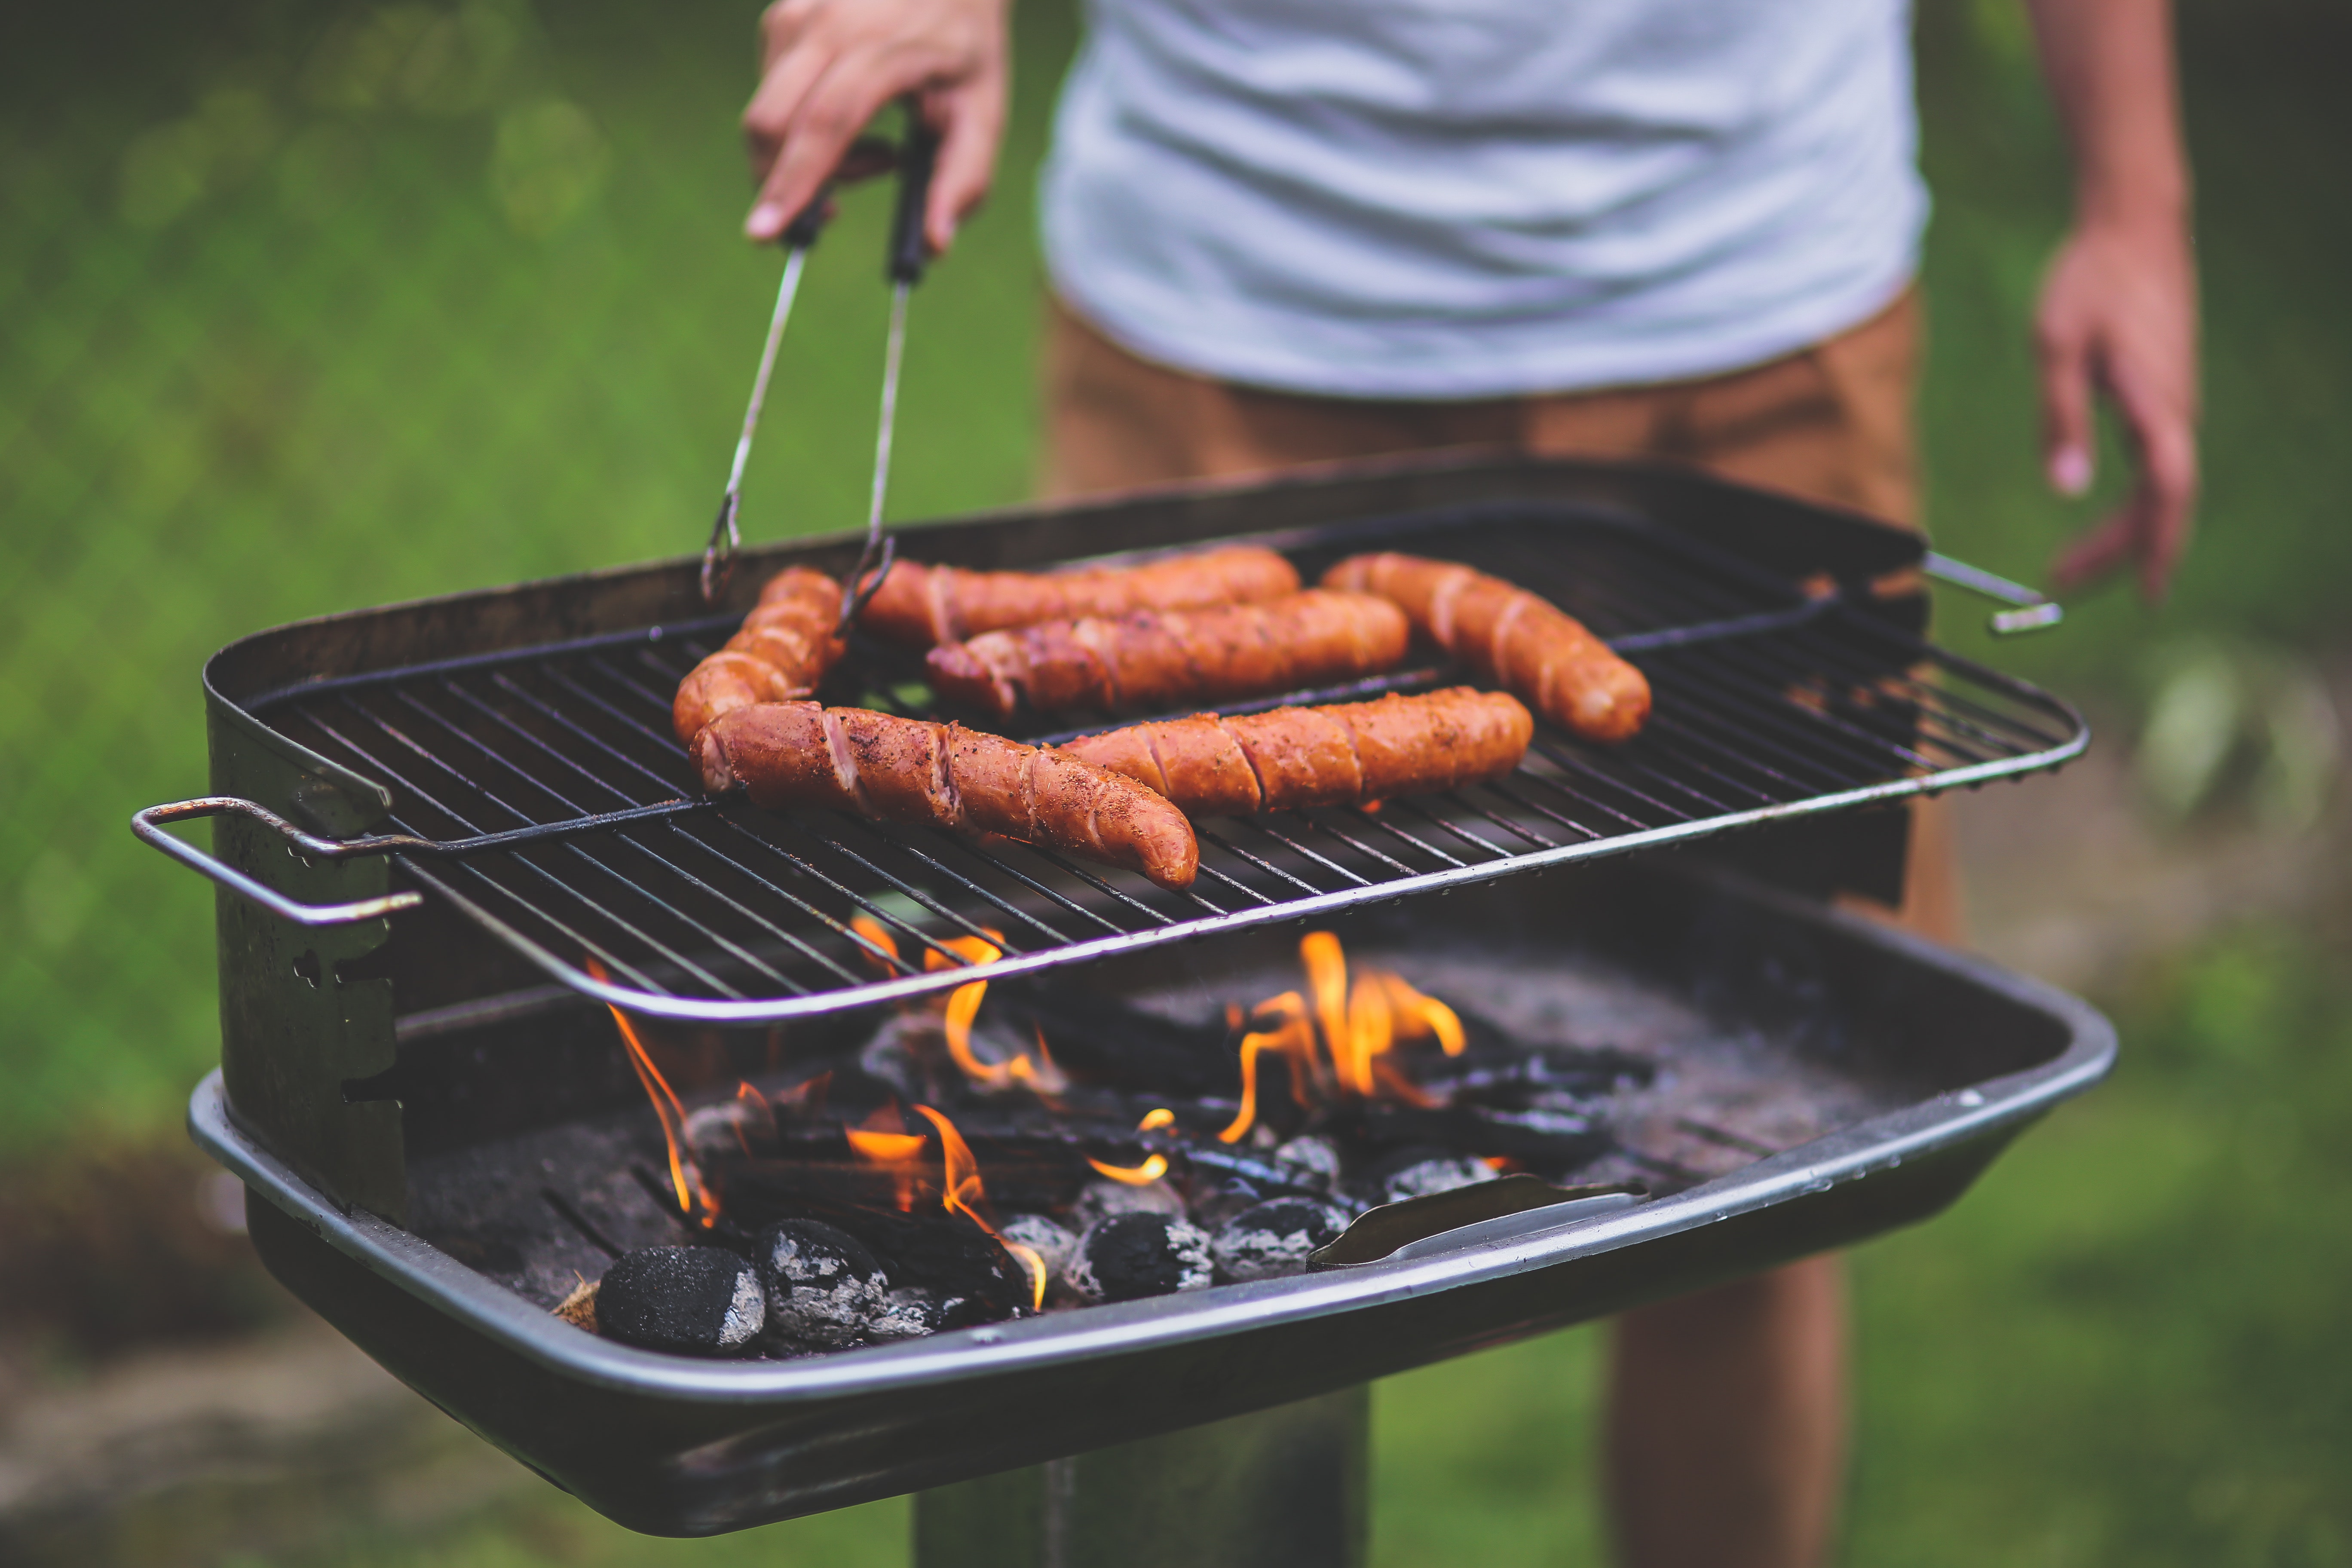 The grill man, Barbecue, Grill, Tasty, Sausages, HQ Photo